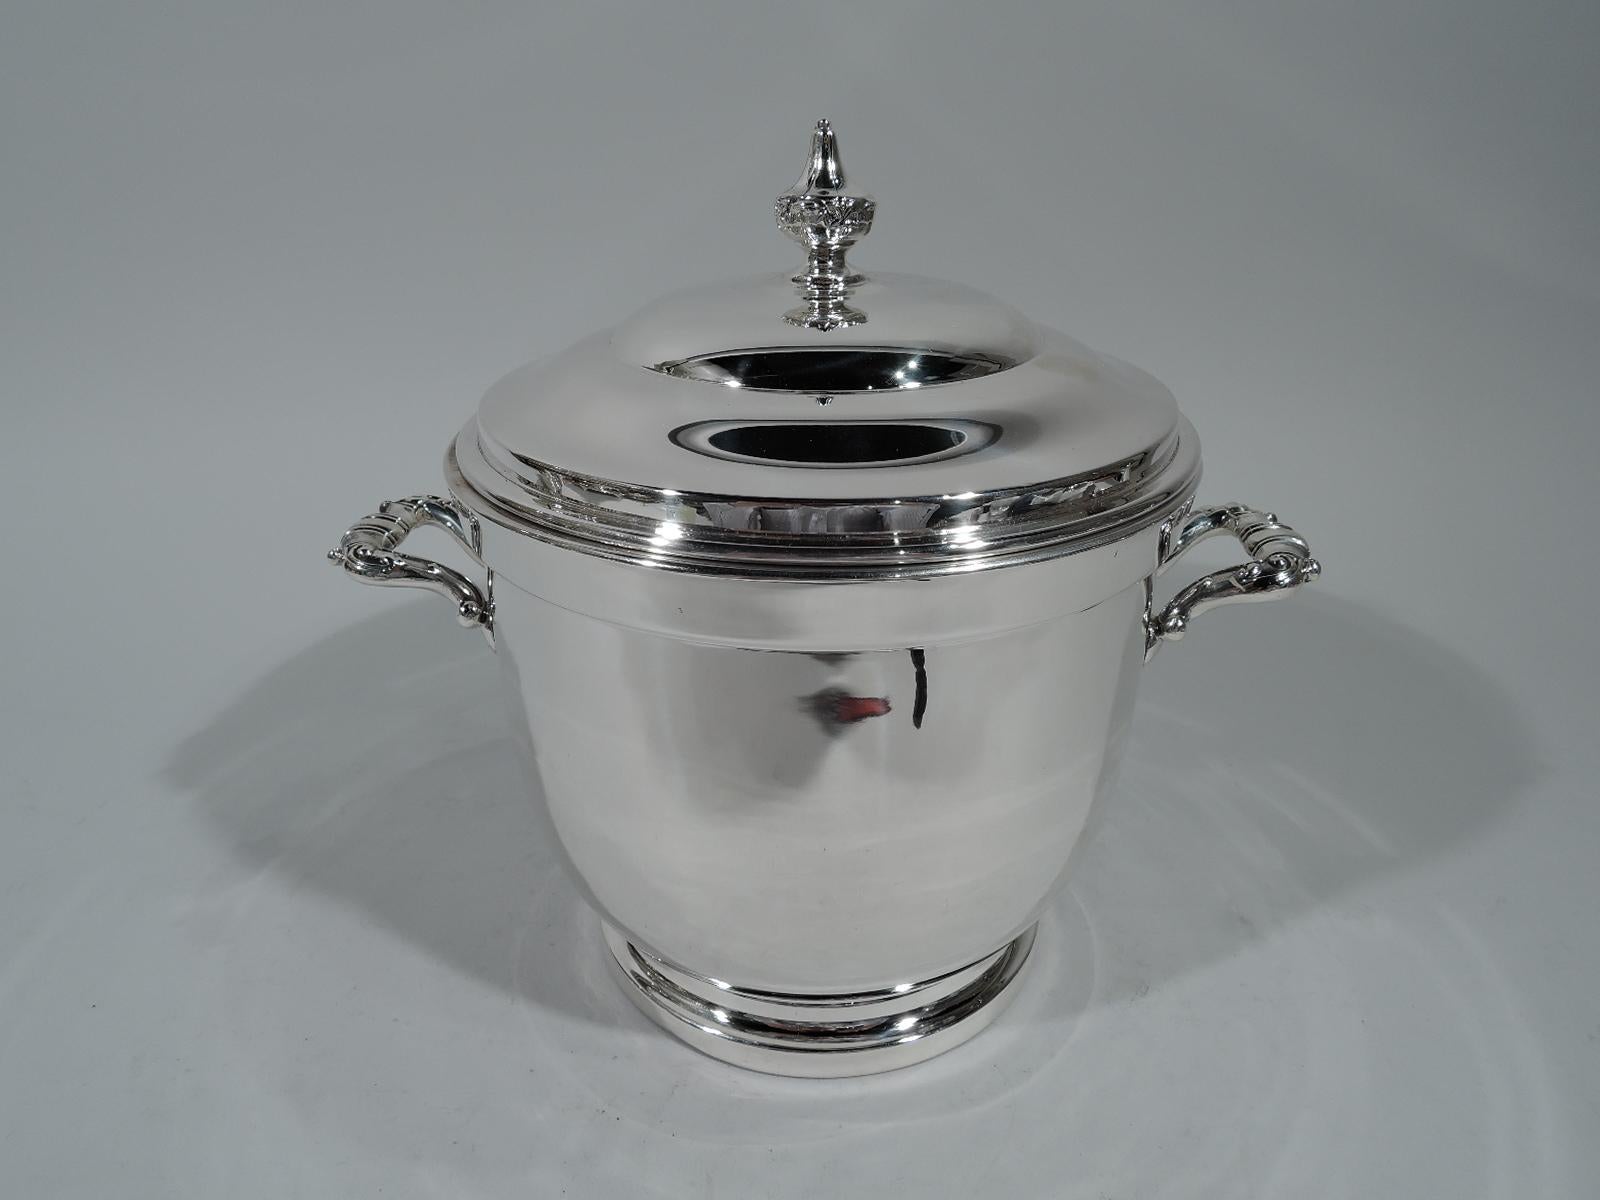 American Mid-Century Modern sterling silver ice bucket. Made by Poole in Taunton, Mass. Urn form on stepped foot. Double-domed cover with tooled vase finial. Ornamented bracket side handles. Indian chief in native headdress and beaded buckskin coat